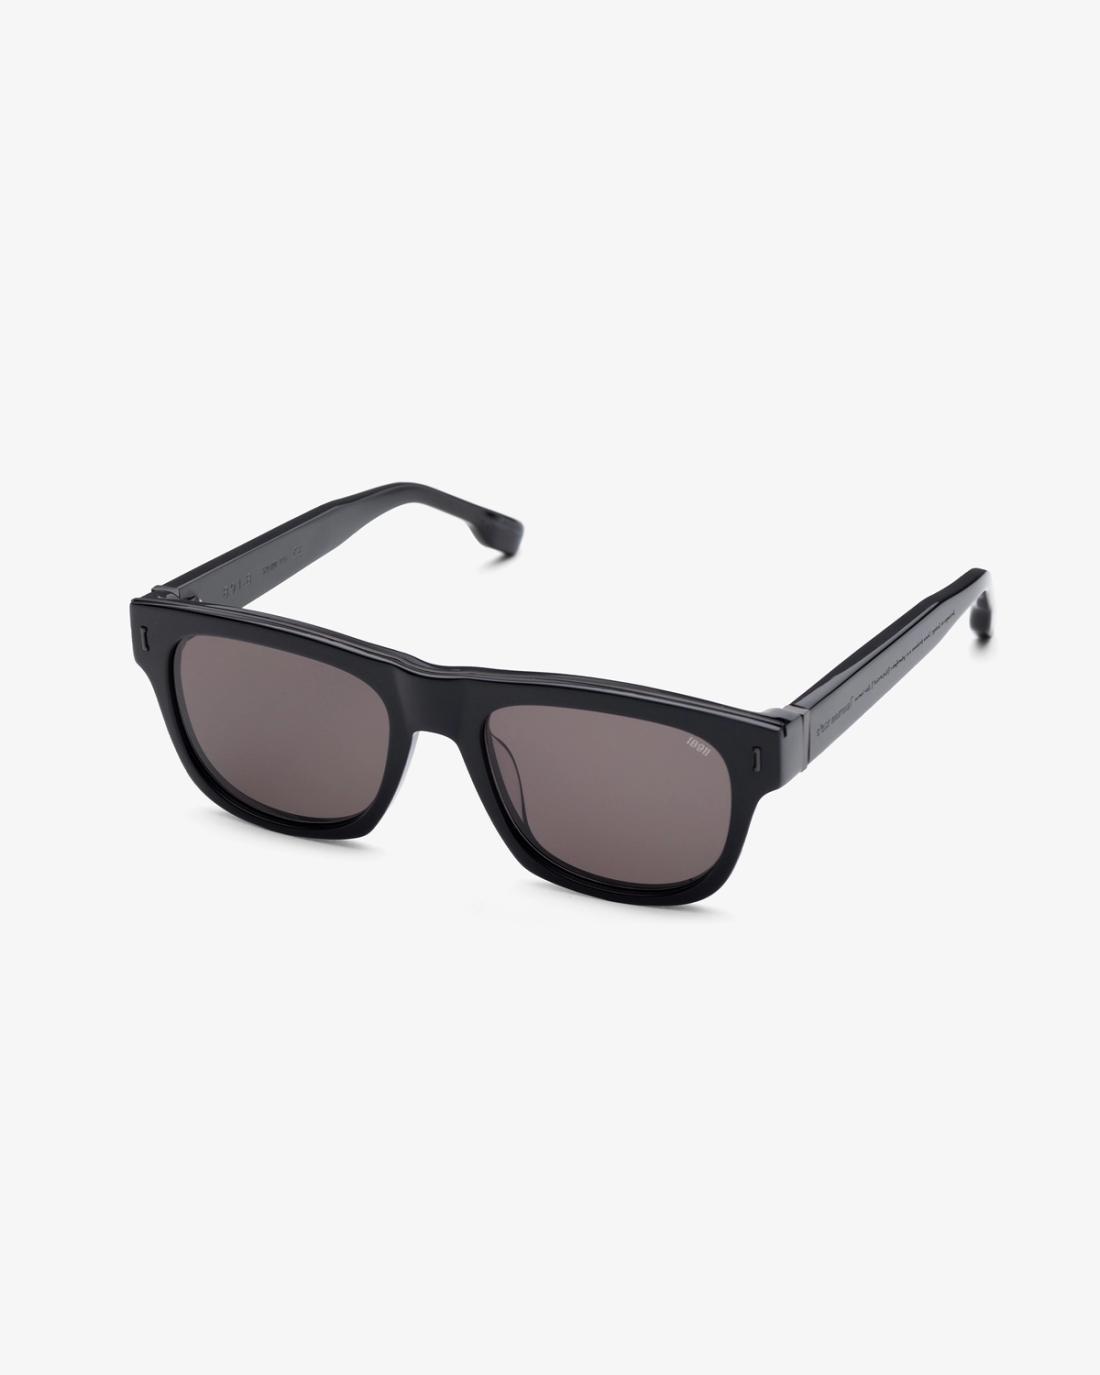 The Glossy Director Sunglasses